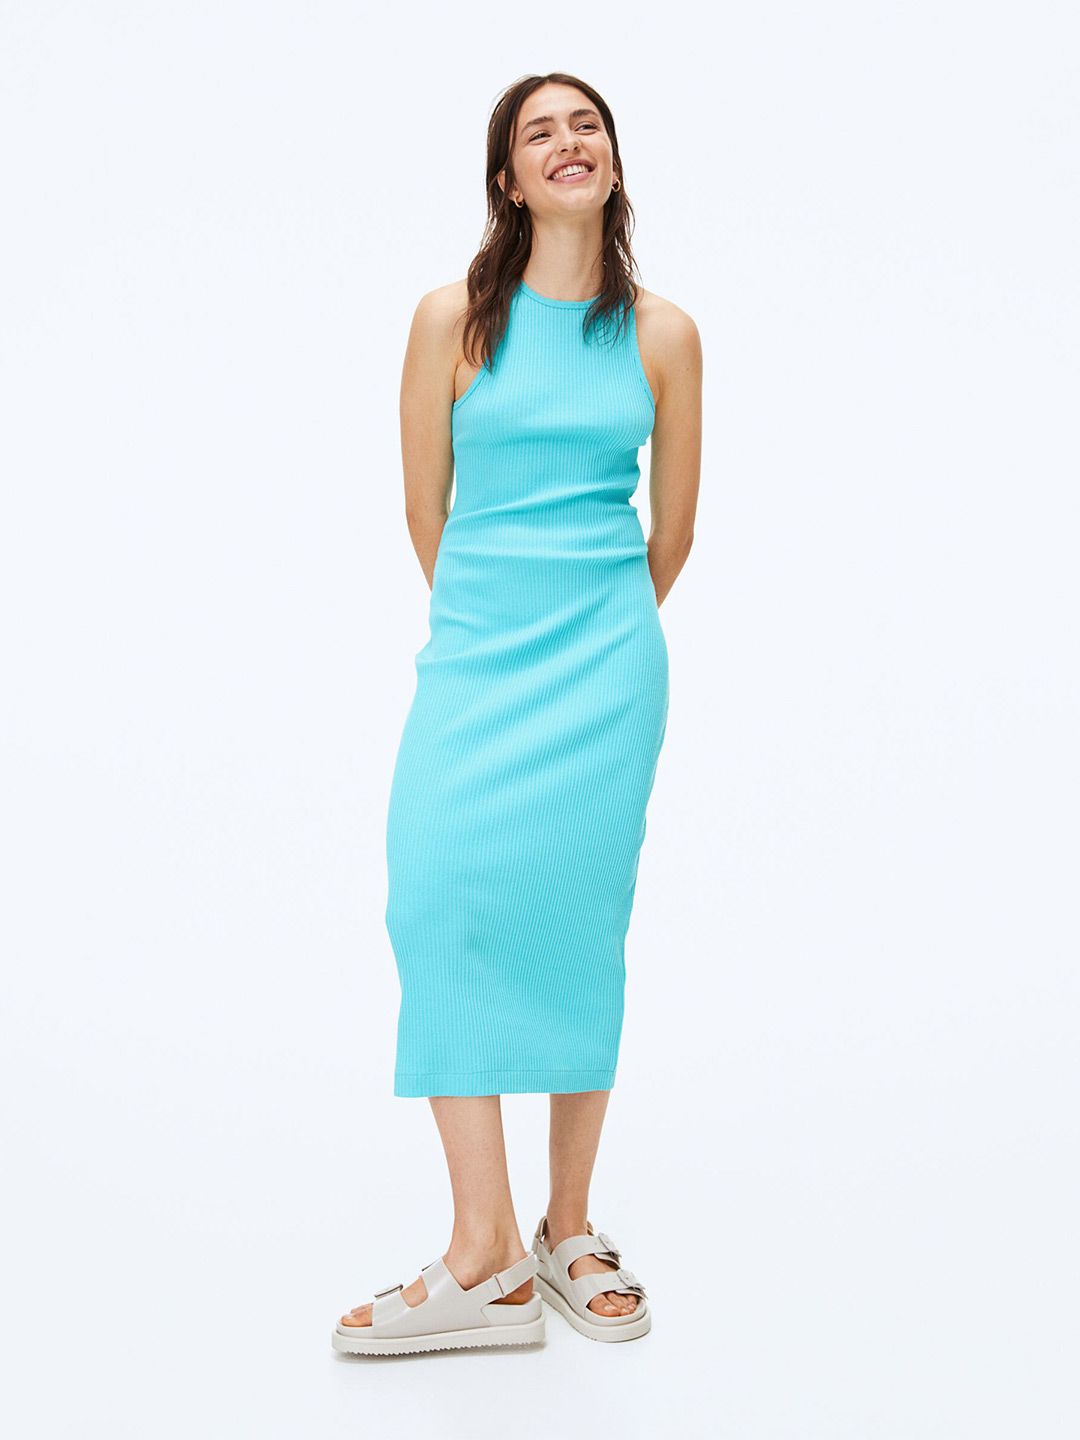 H&M Women Turquoise Blue Ribbed Dress Price in India